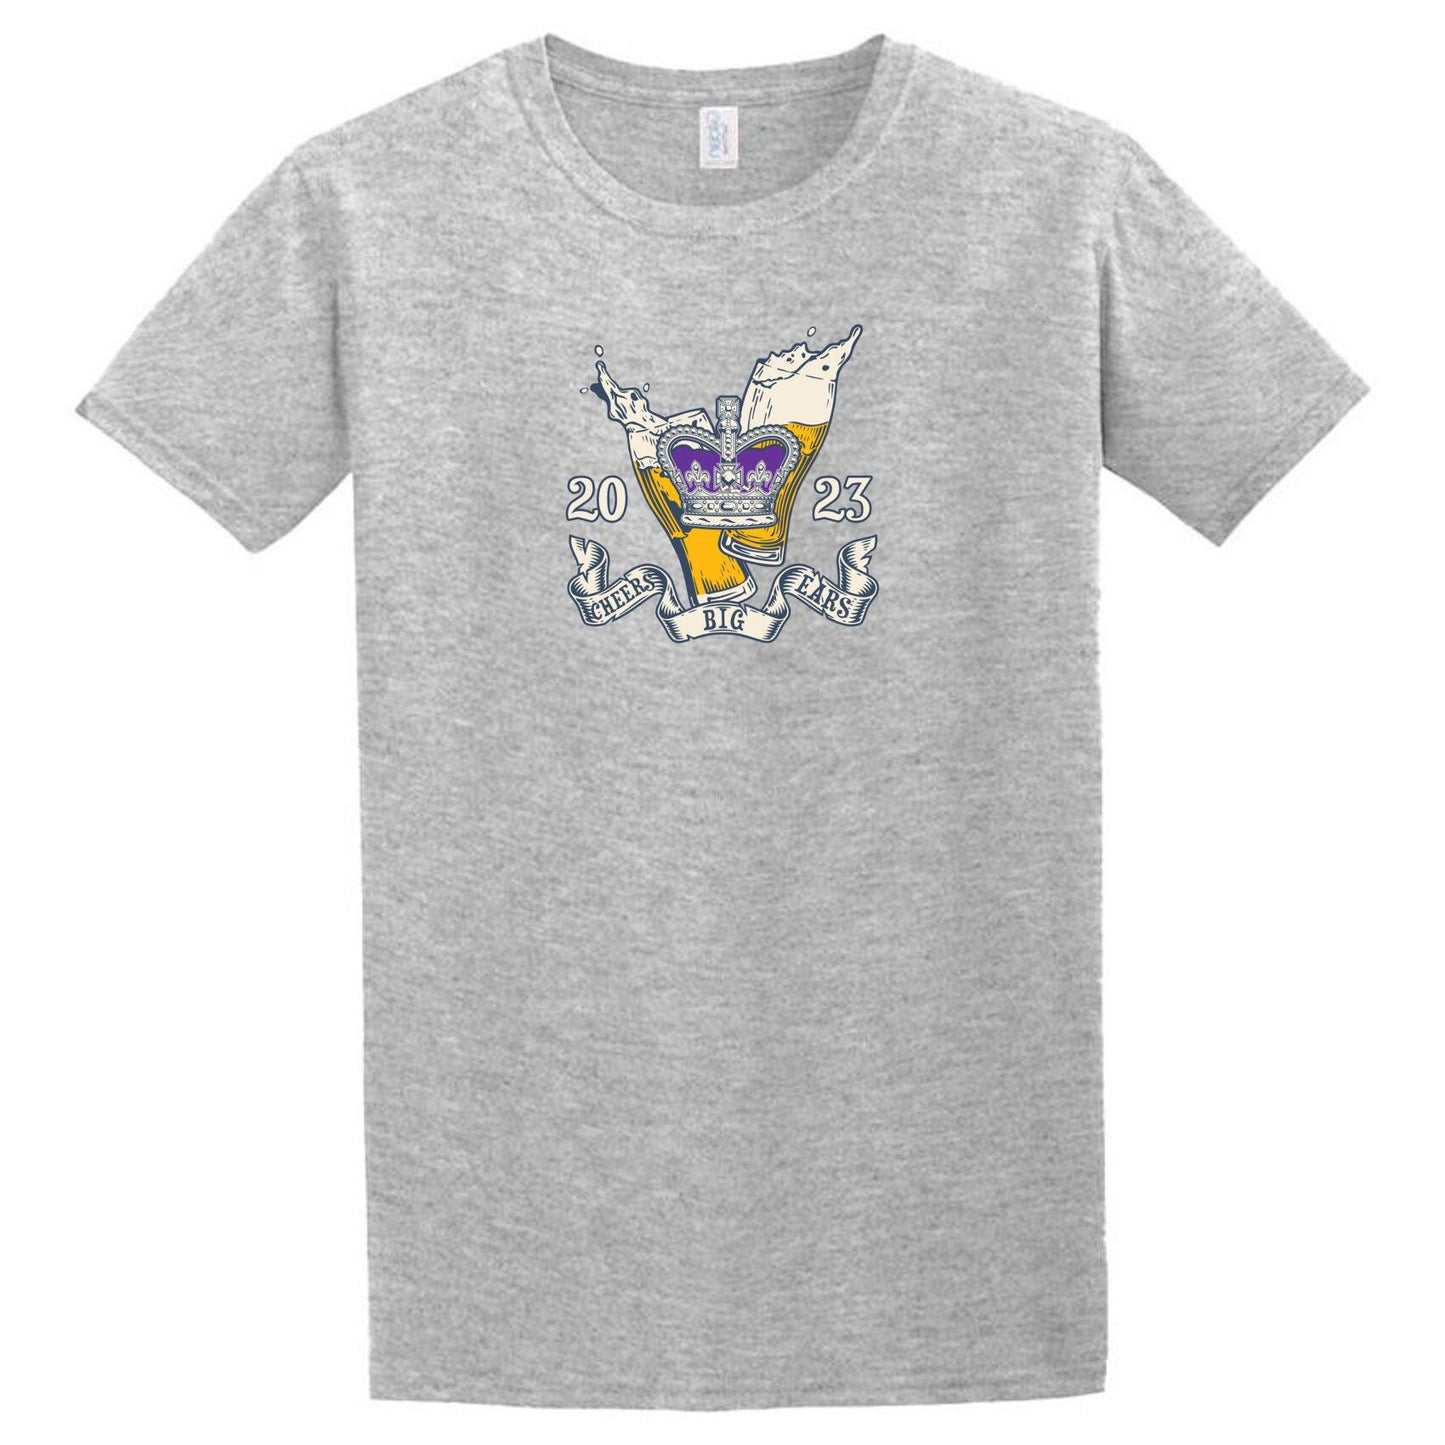 A gray historical satire Cheers Big Ears T-Shirt with an image of a crest, by Twisted Gifts.